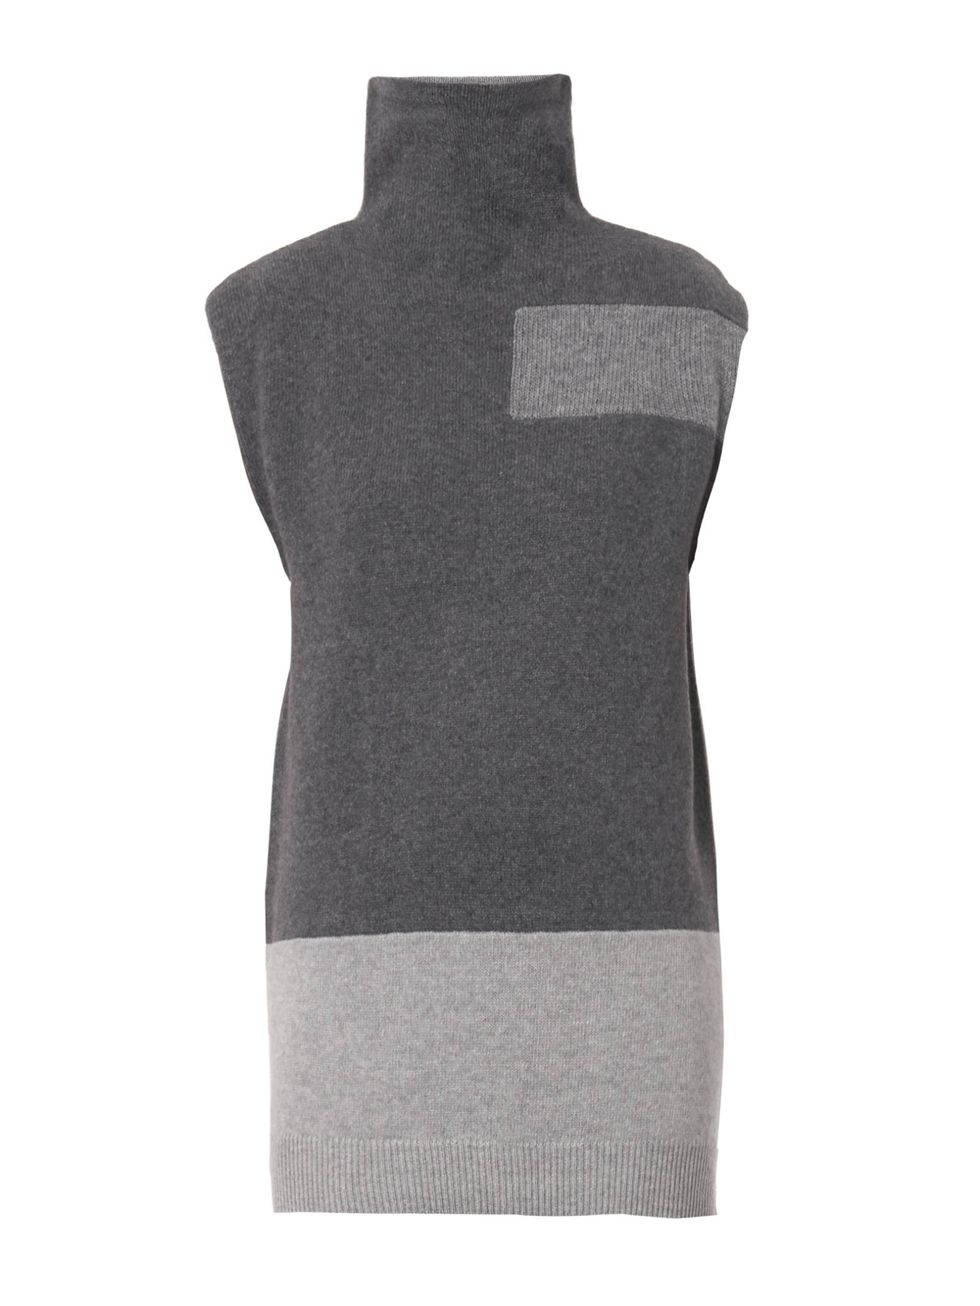 Sleeve, Textile, Black, Pattern, Grey, Woolen, Sweater, Wool, Natural material, Mannequin, 